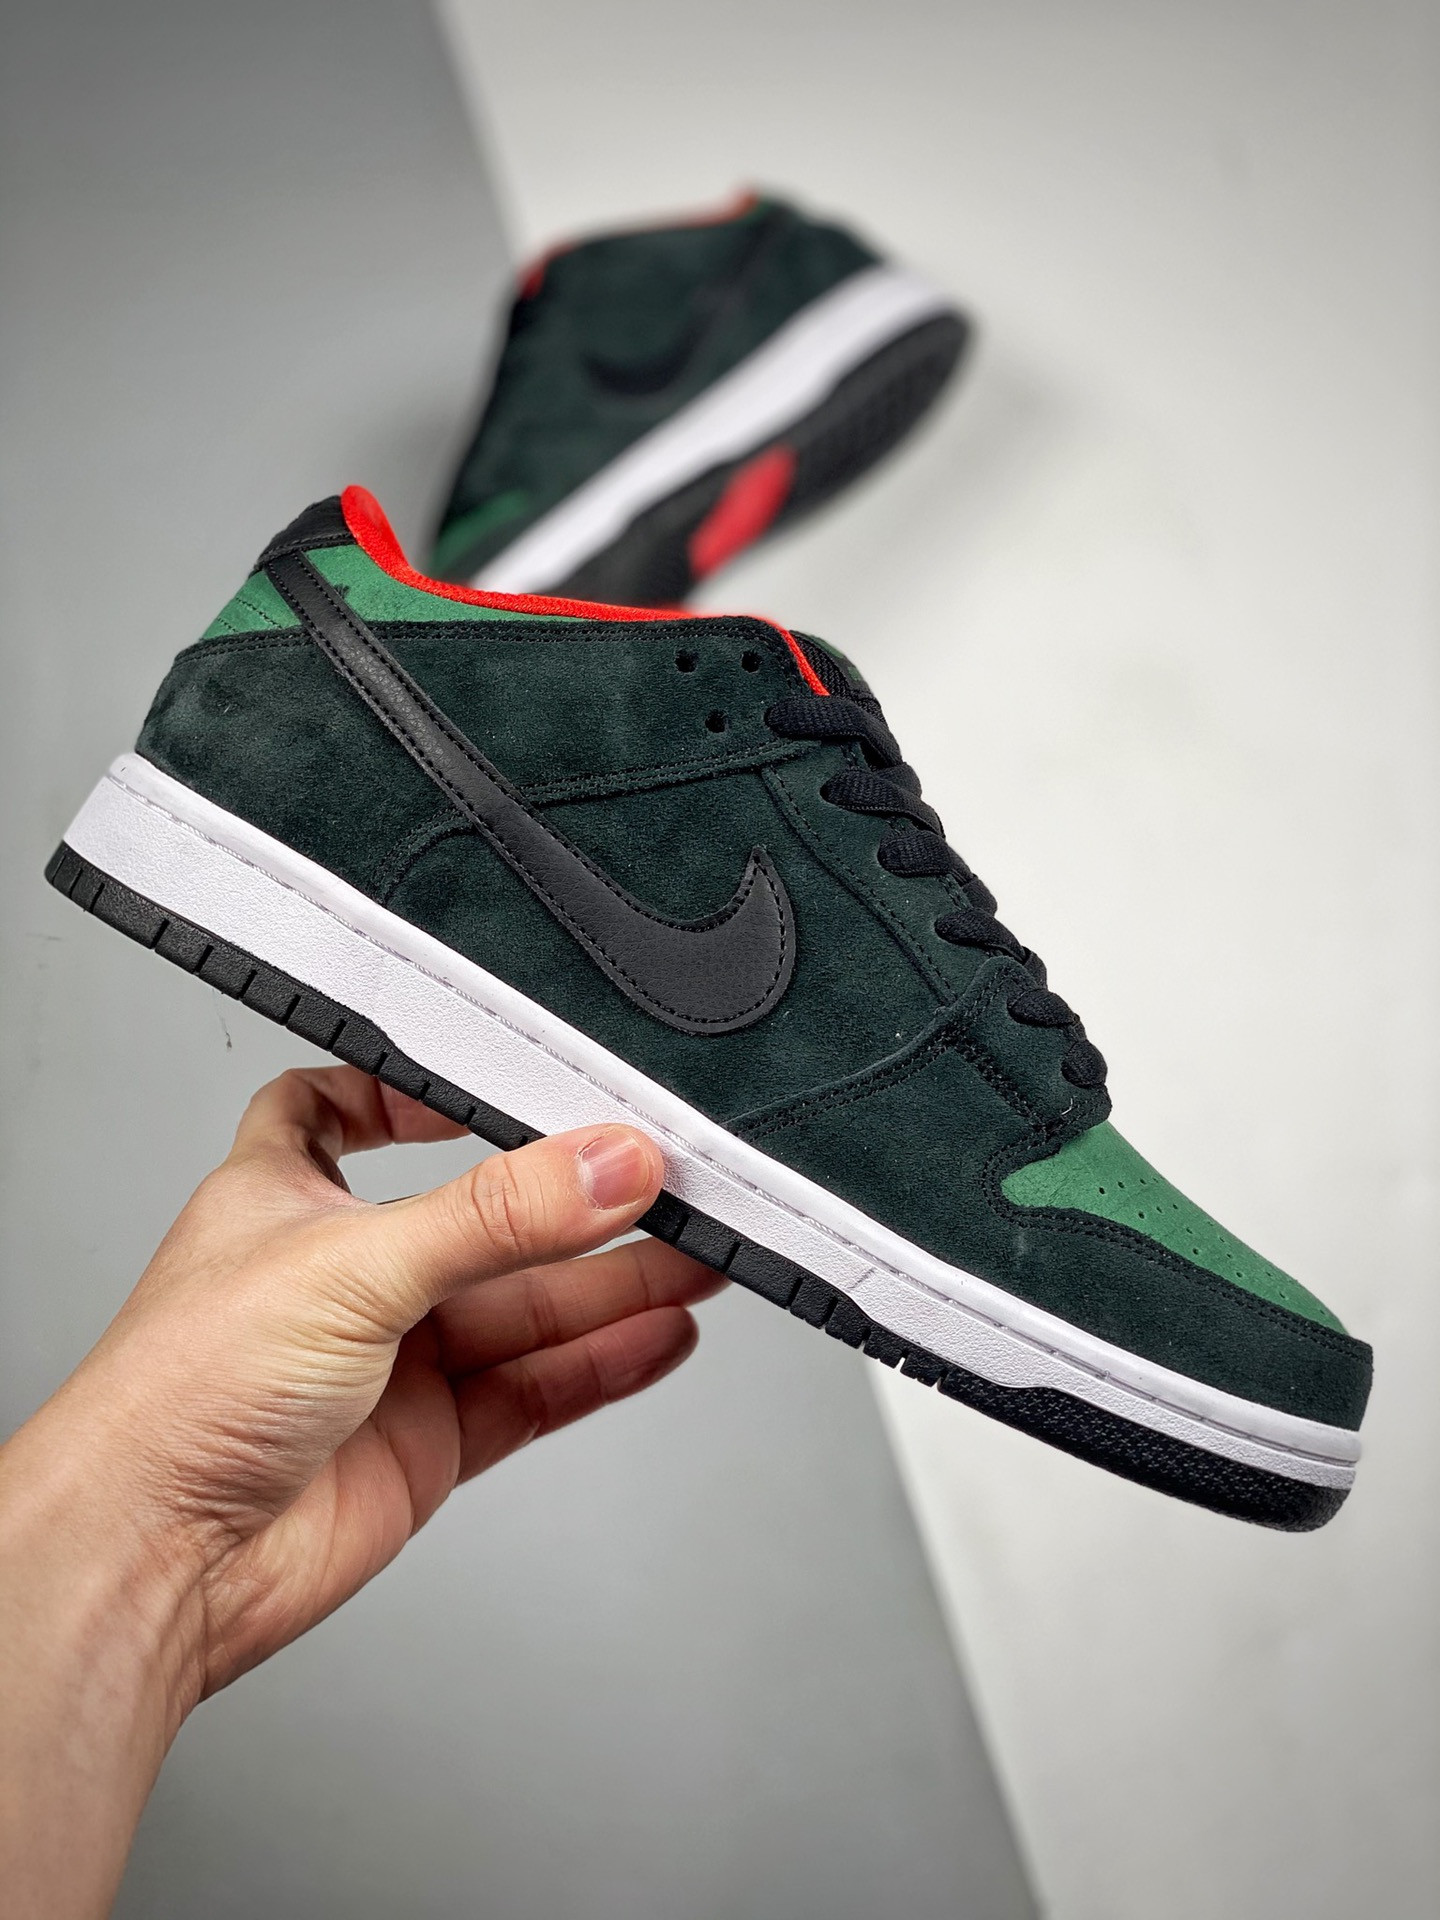 Nike SB Dunk Low Pro Reptile Black George Green For Sale